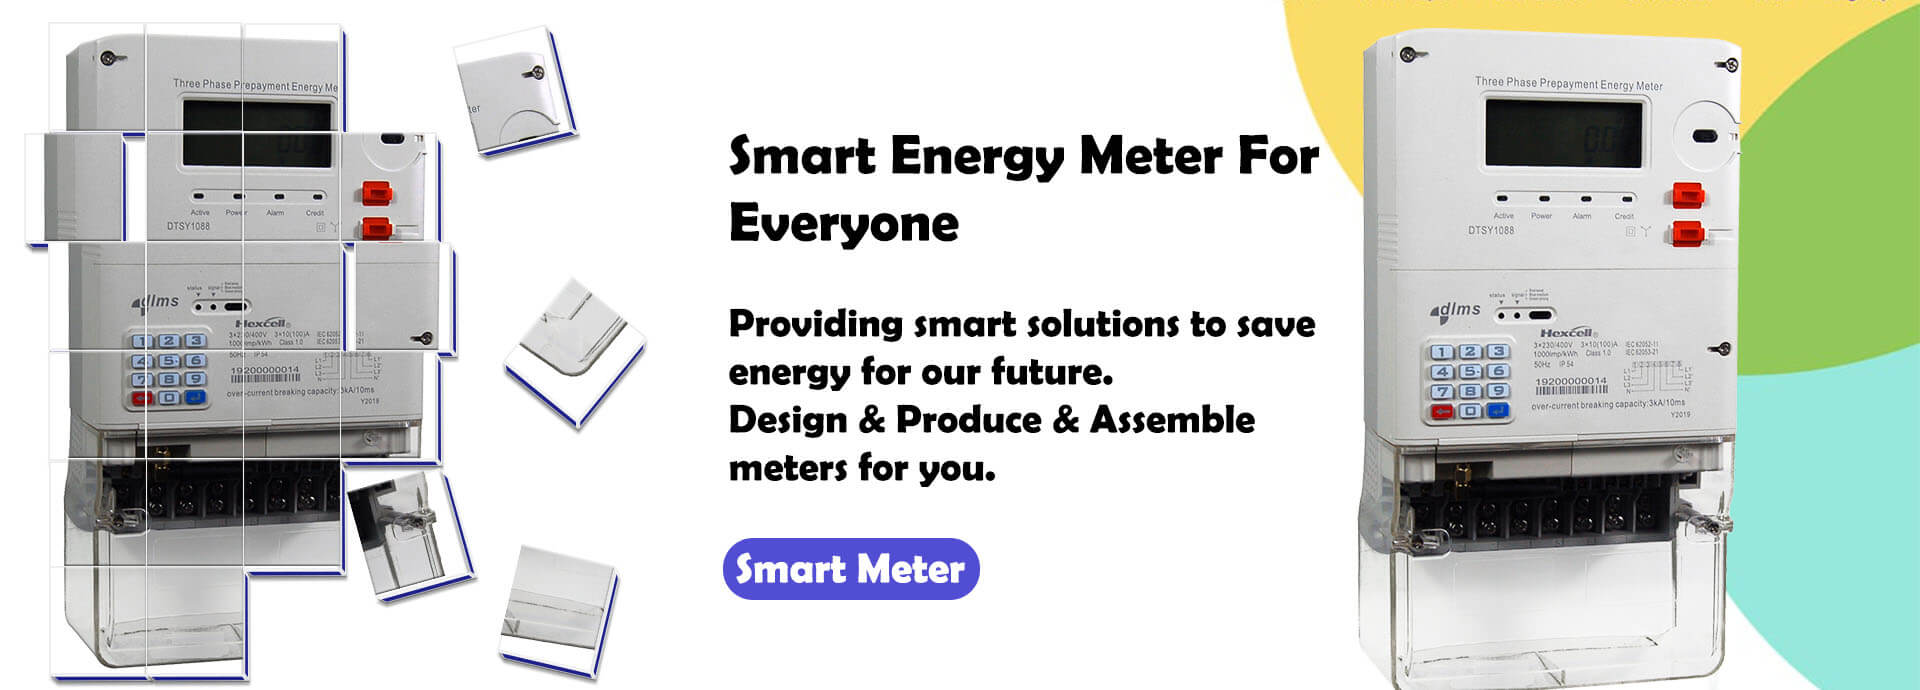 Hexcell Energy Meter